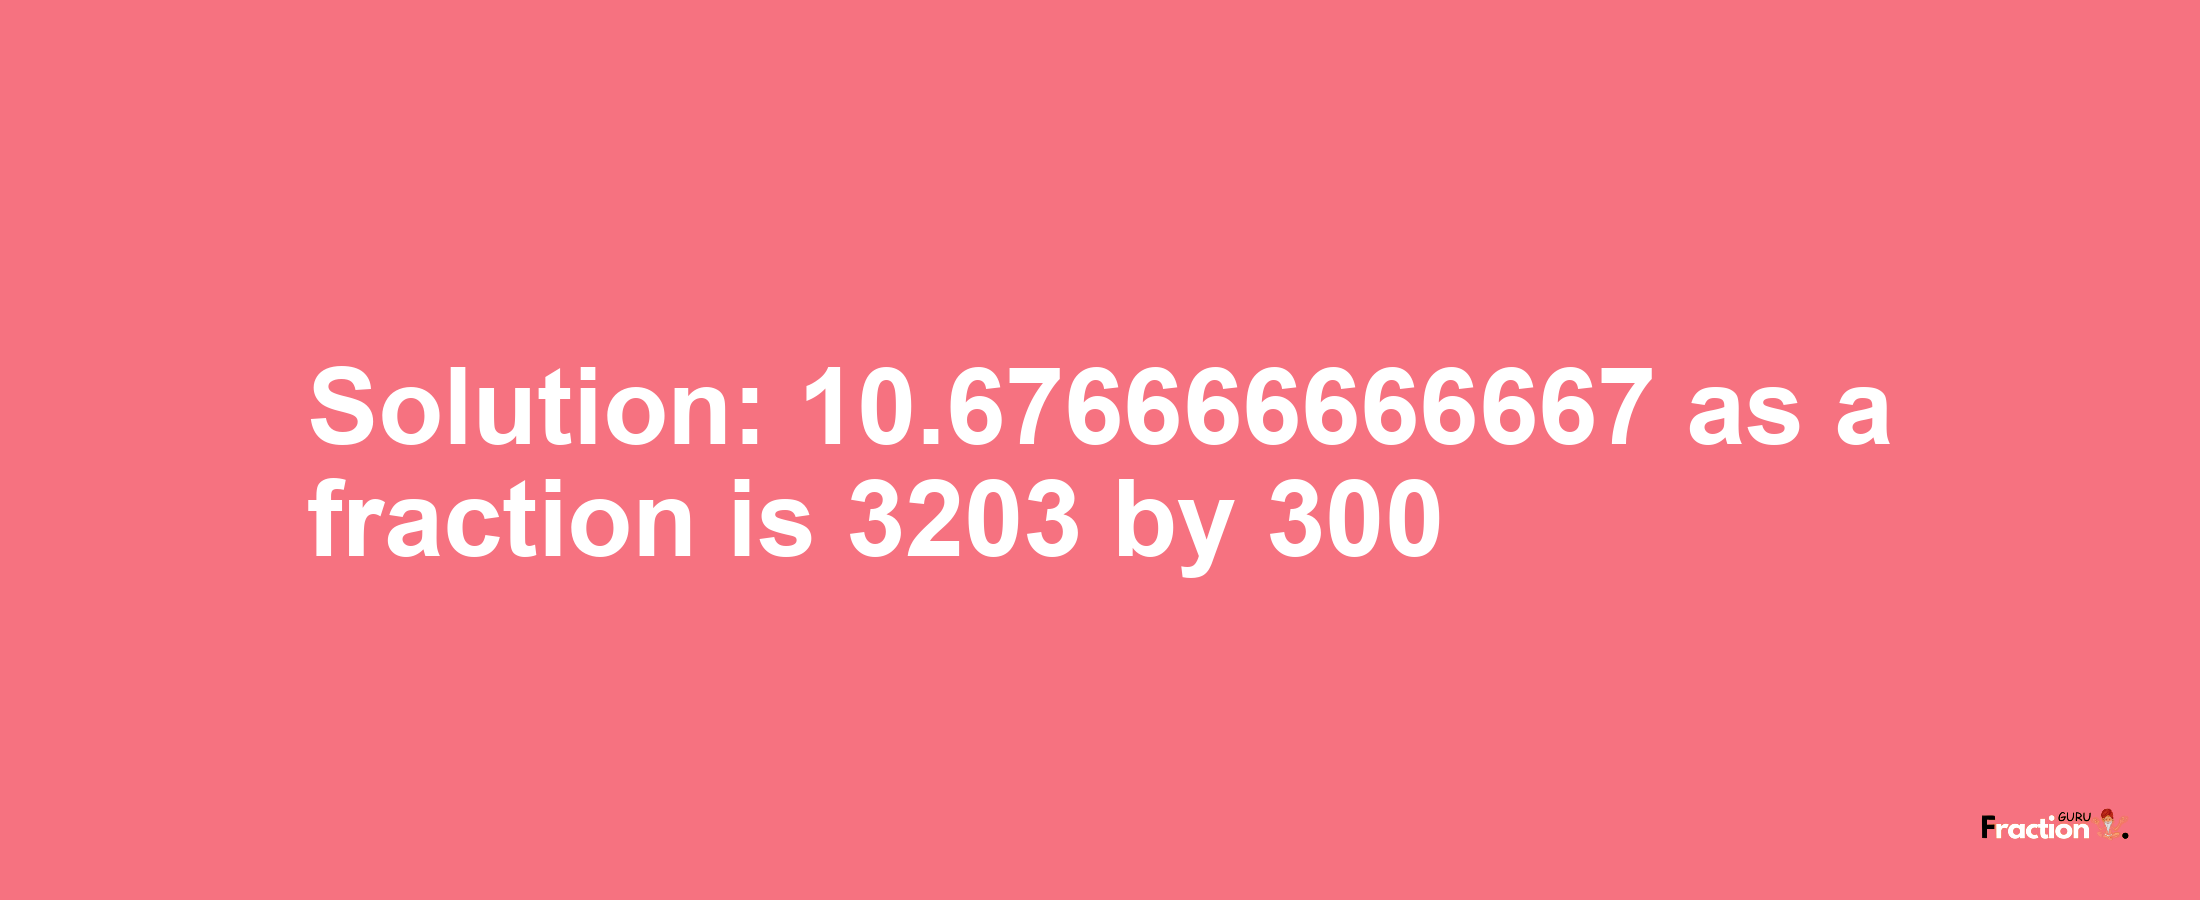 Solution:10.676666666667 as a fraction is 3203/300